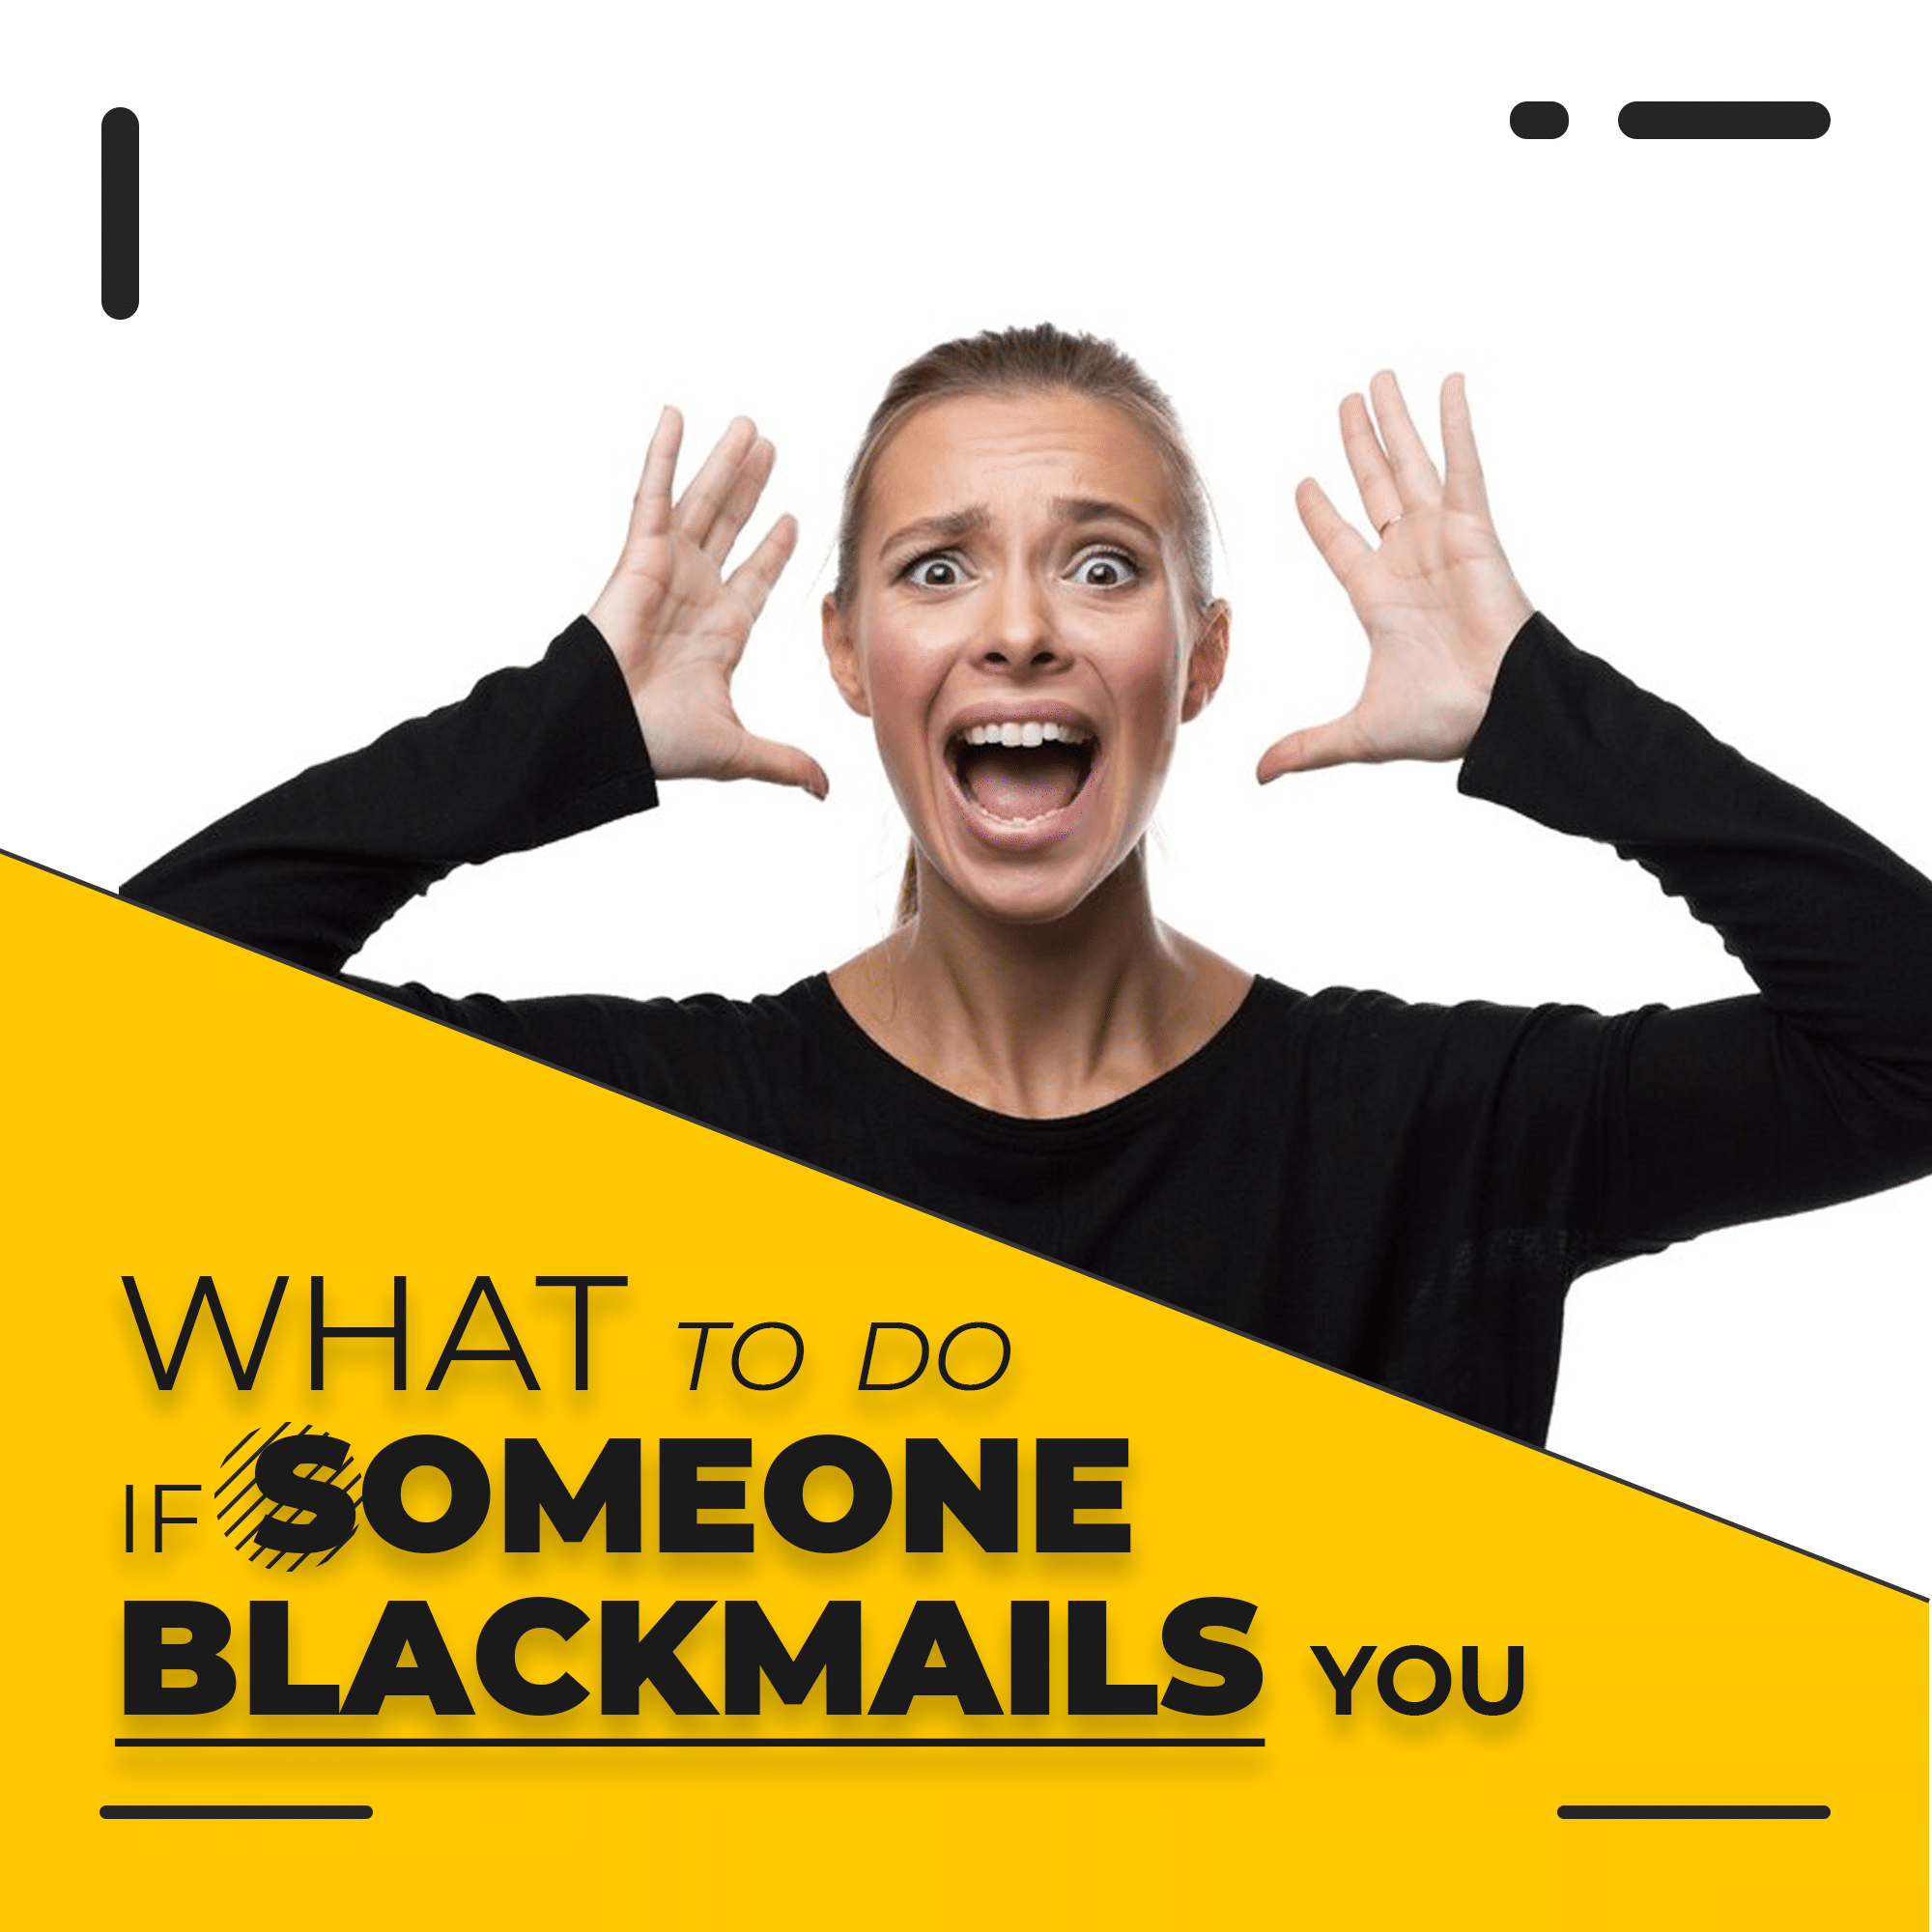 What To Do If Someone Blackmails You